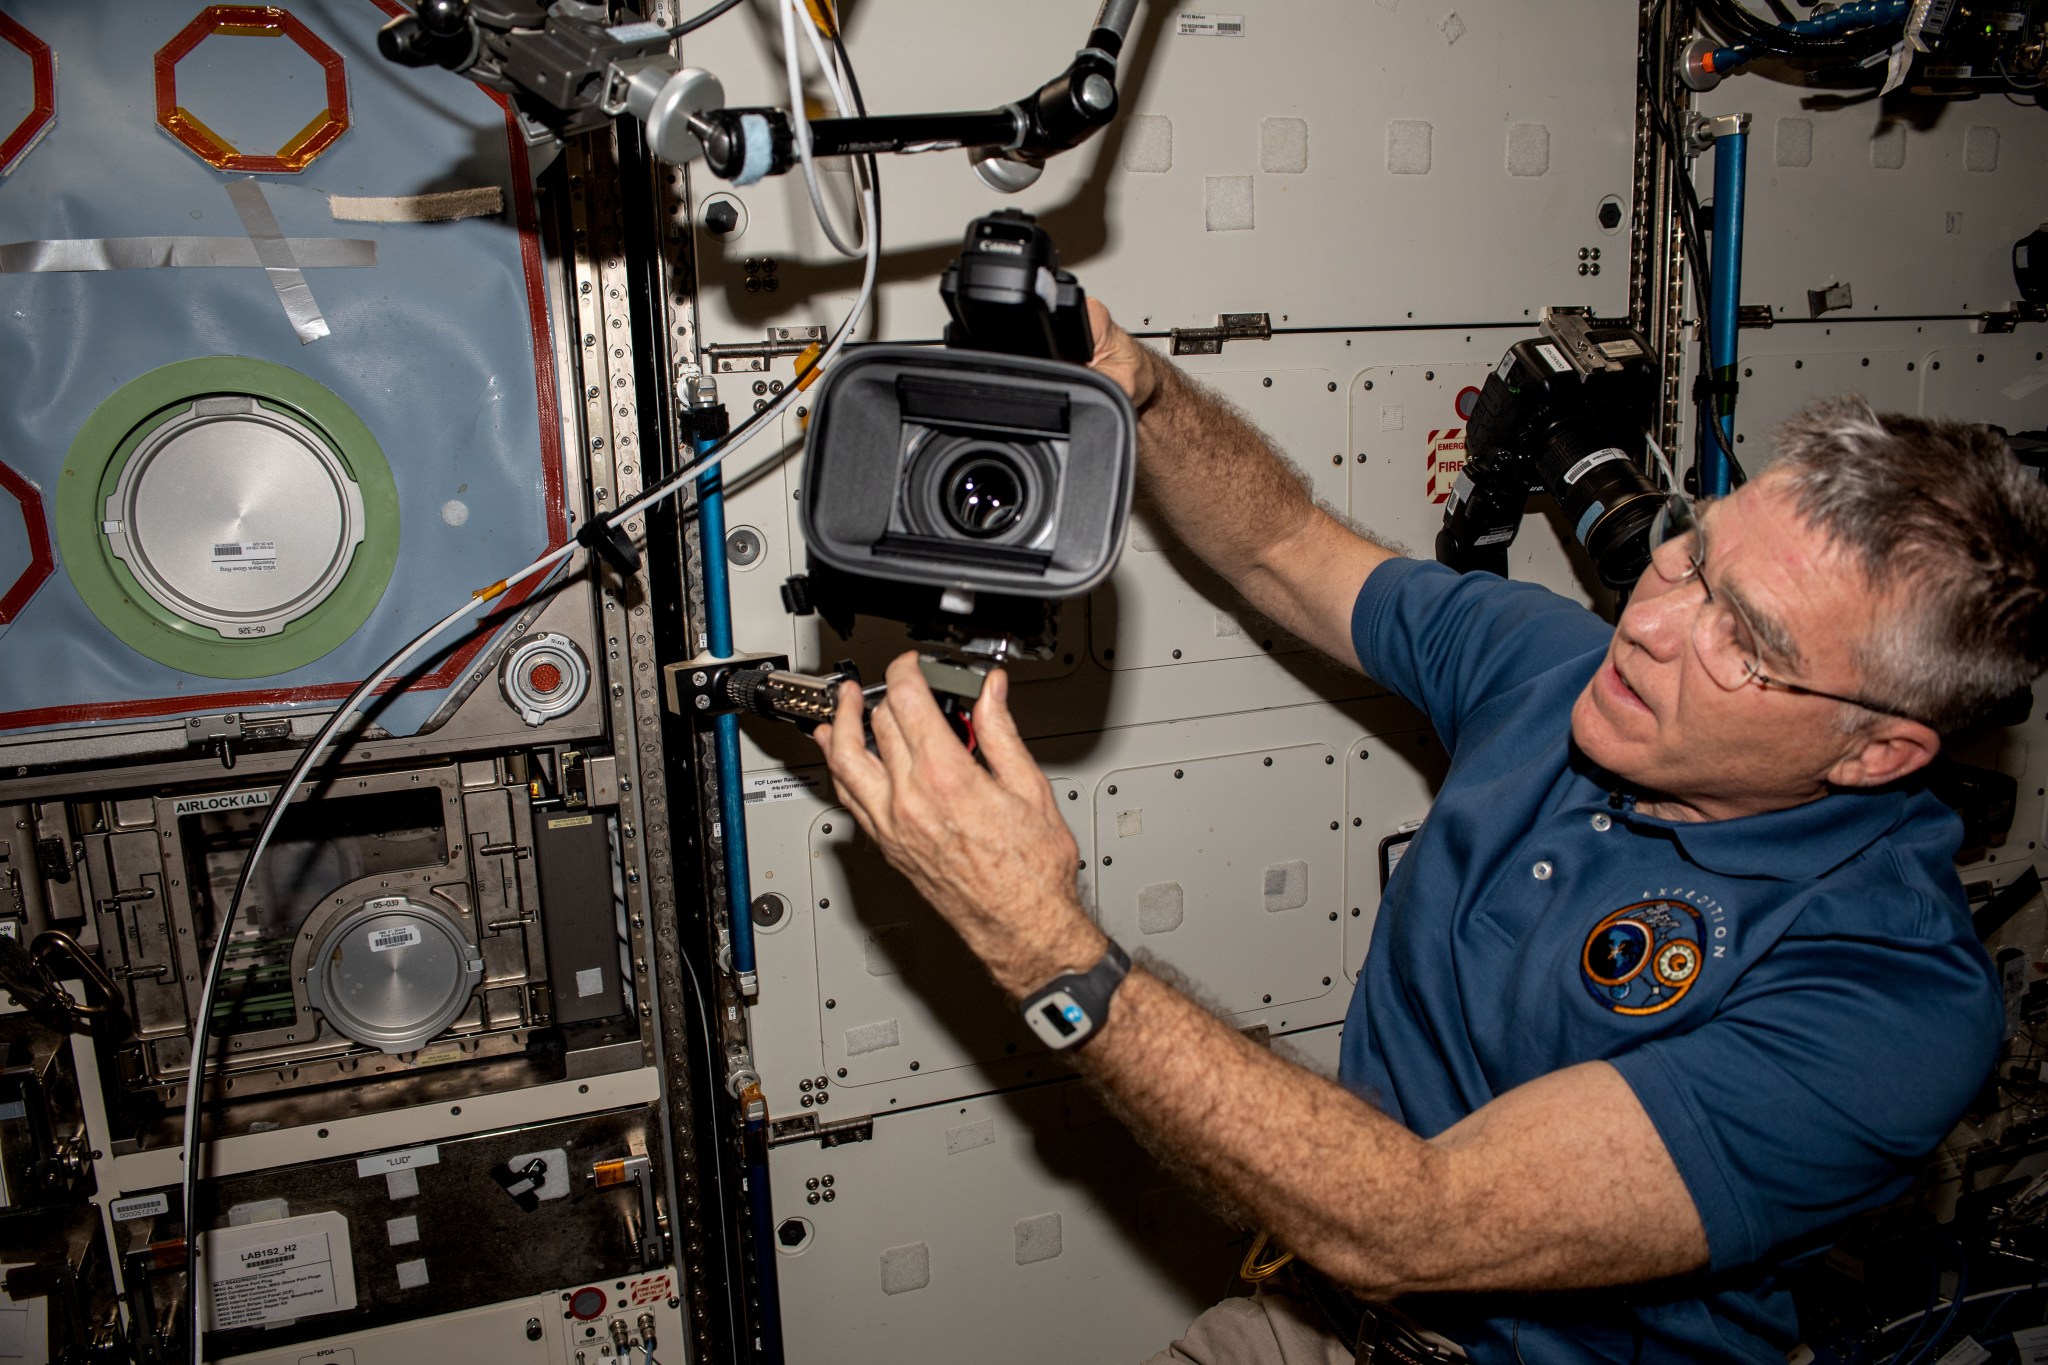 NASA astronaut Stephen Bowen sets up for a test of the Hunch Ball Clamp Monopod, a mounting system for cameras used to track targets on the ground or to take images and video inside the space station.